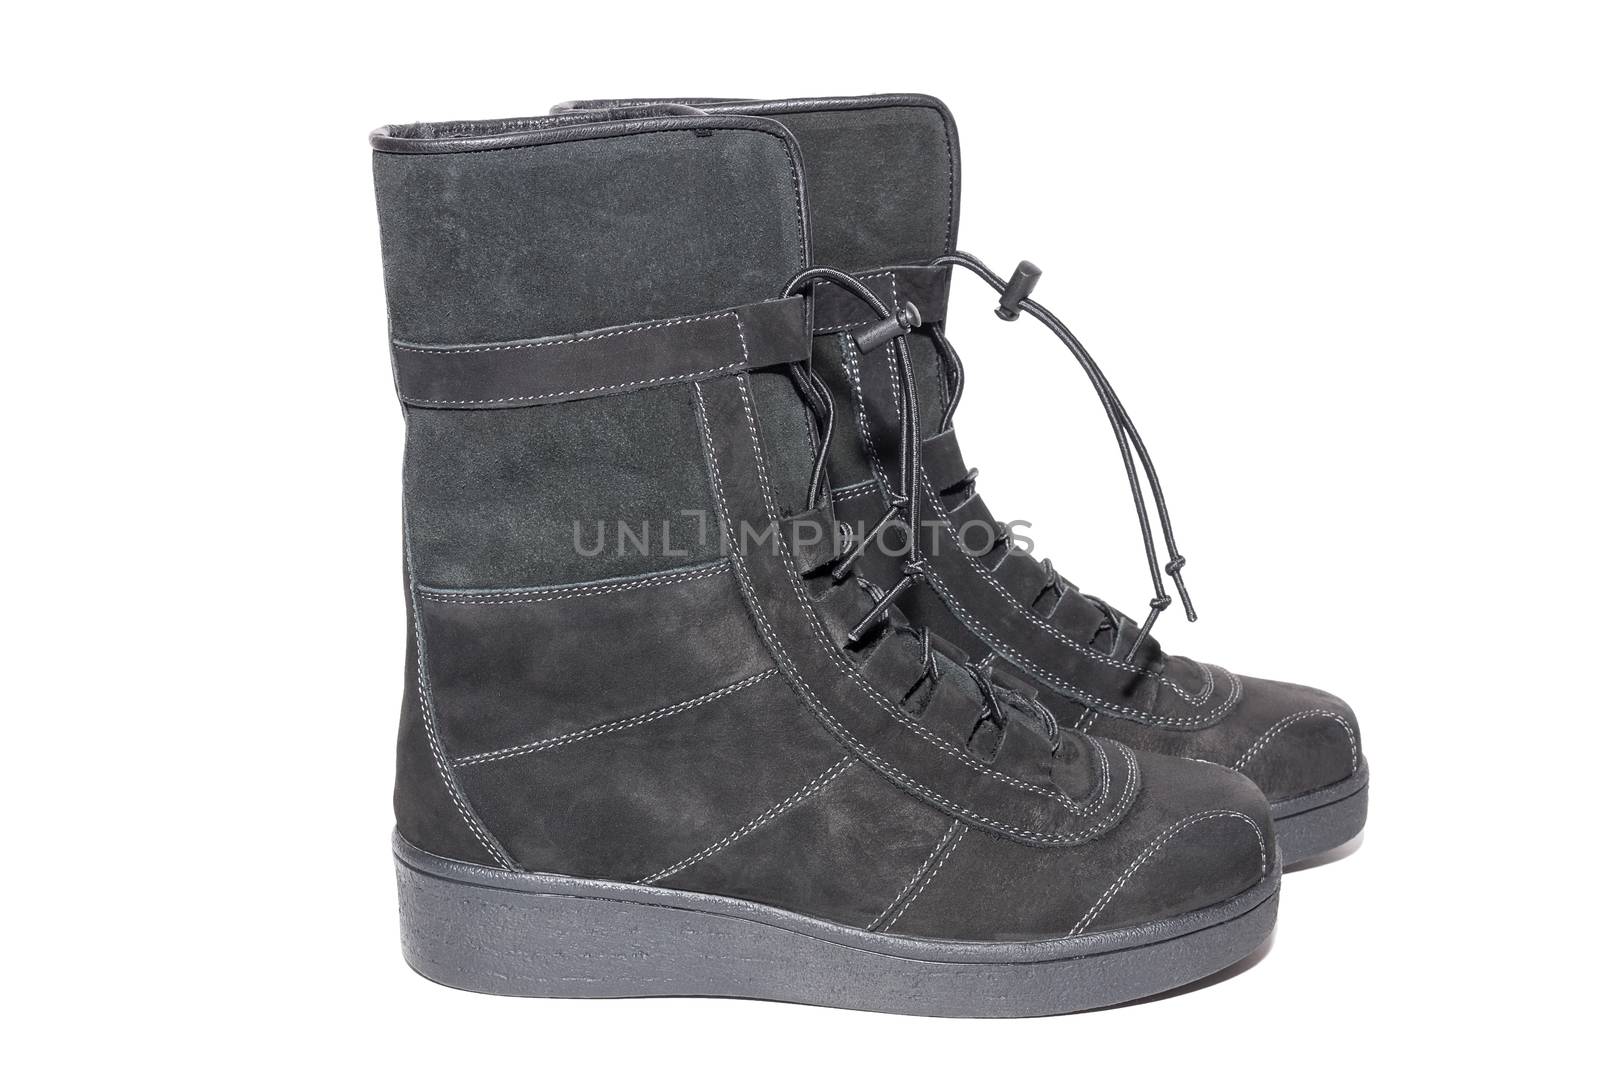 Female suede boots on white background, isolated, studio